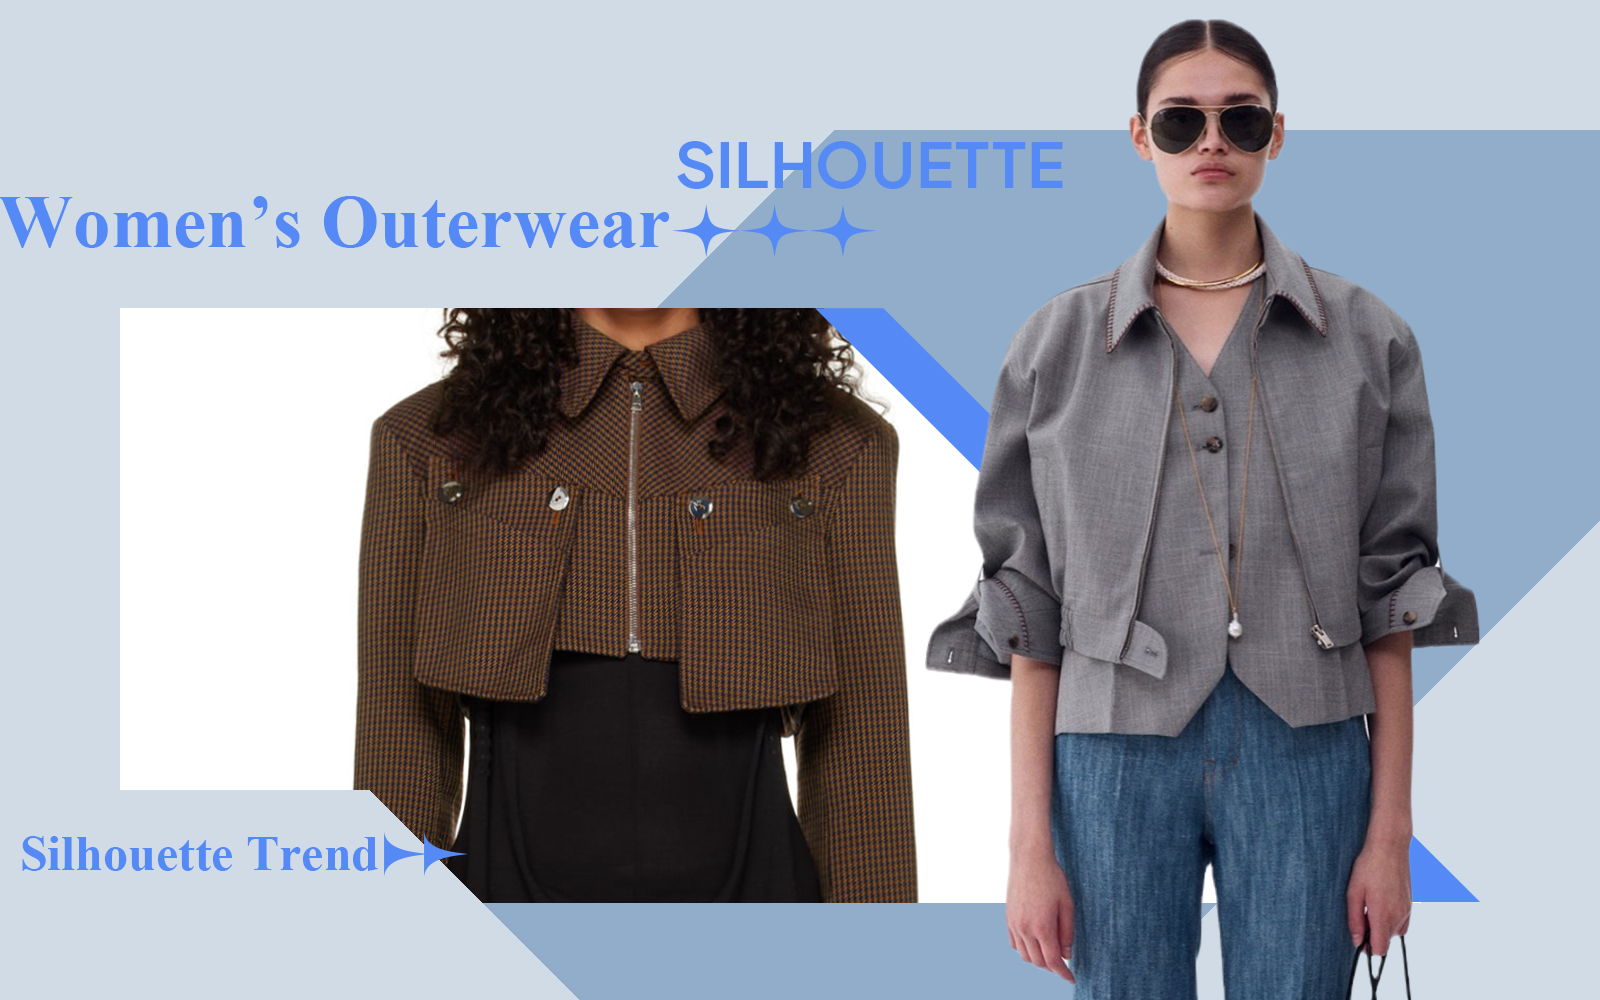 The Silhouette Trend for Women's Outerwear